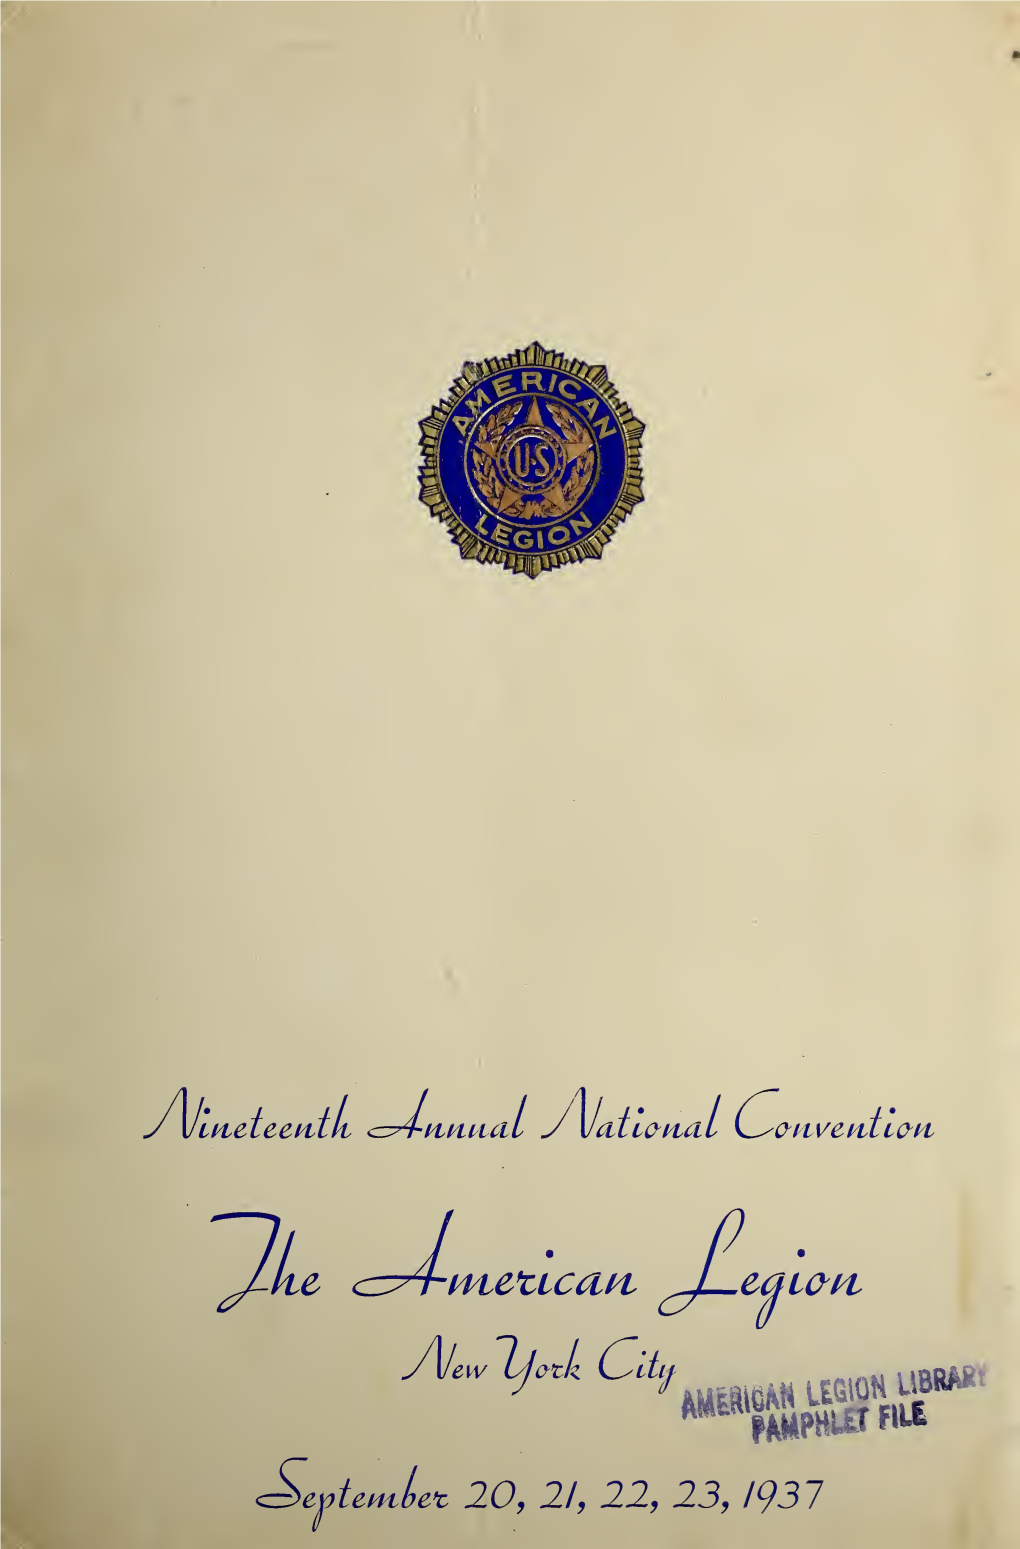 The American Legion 19Th National Convention: Official Program [1937]